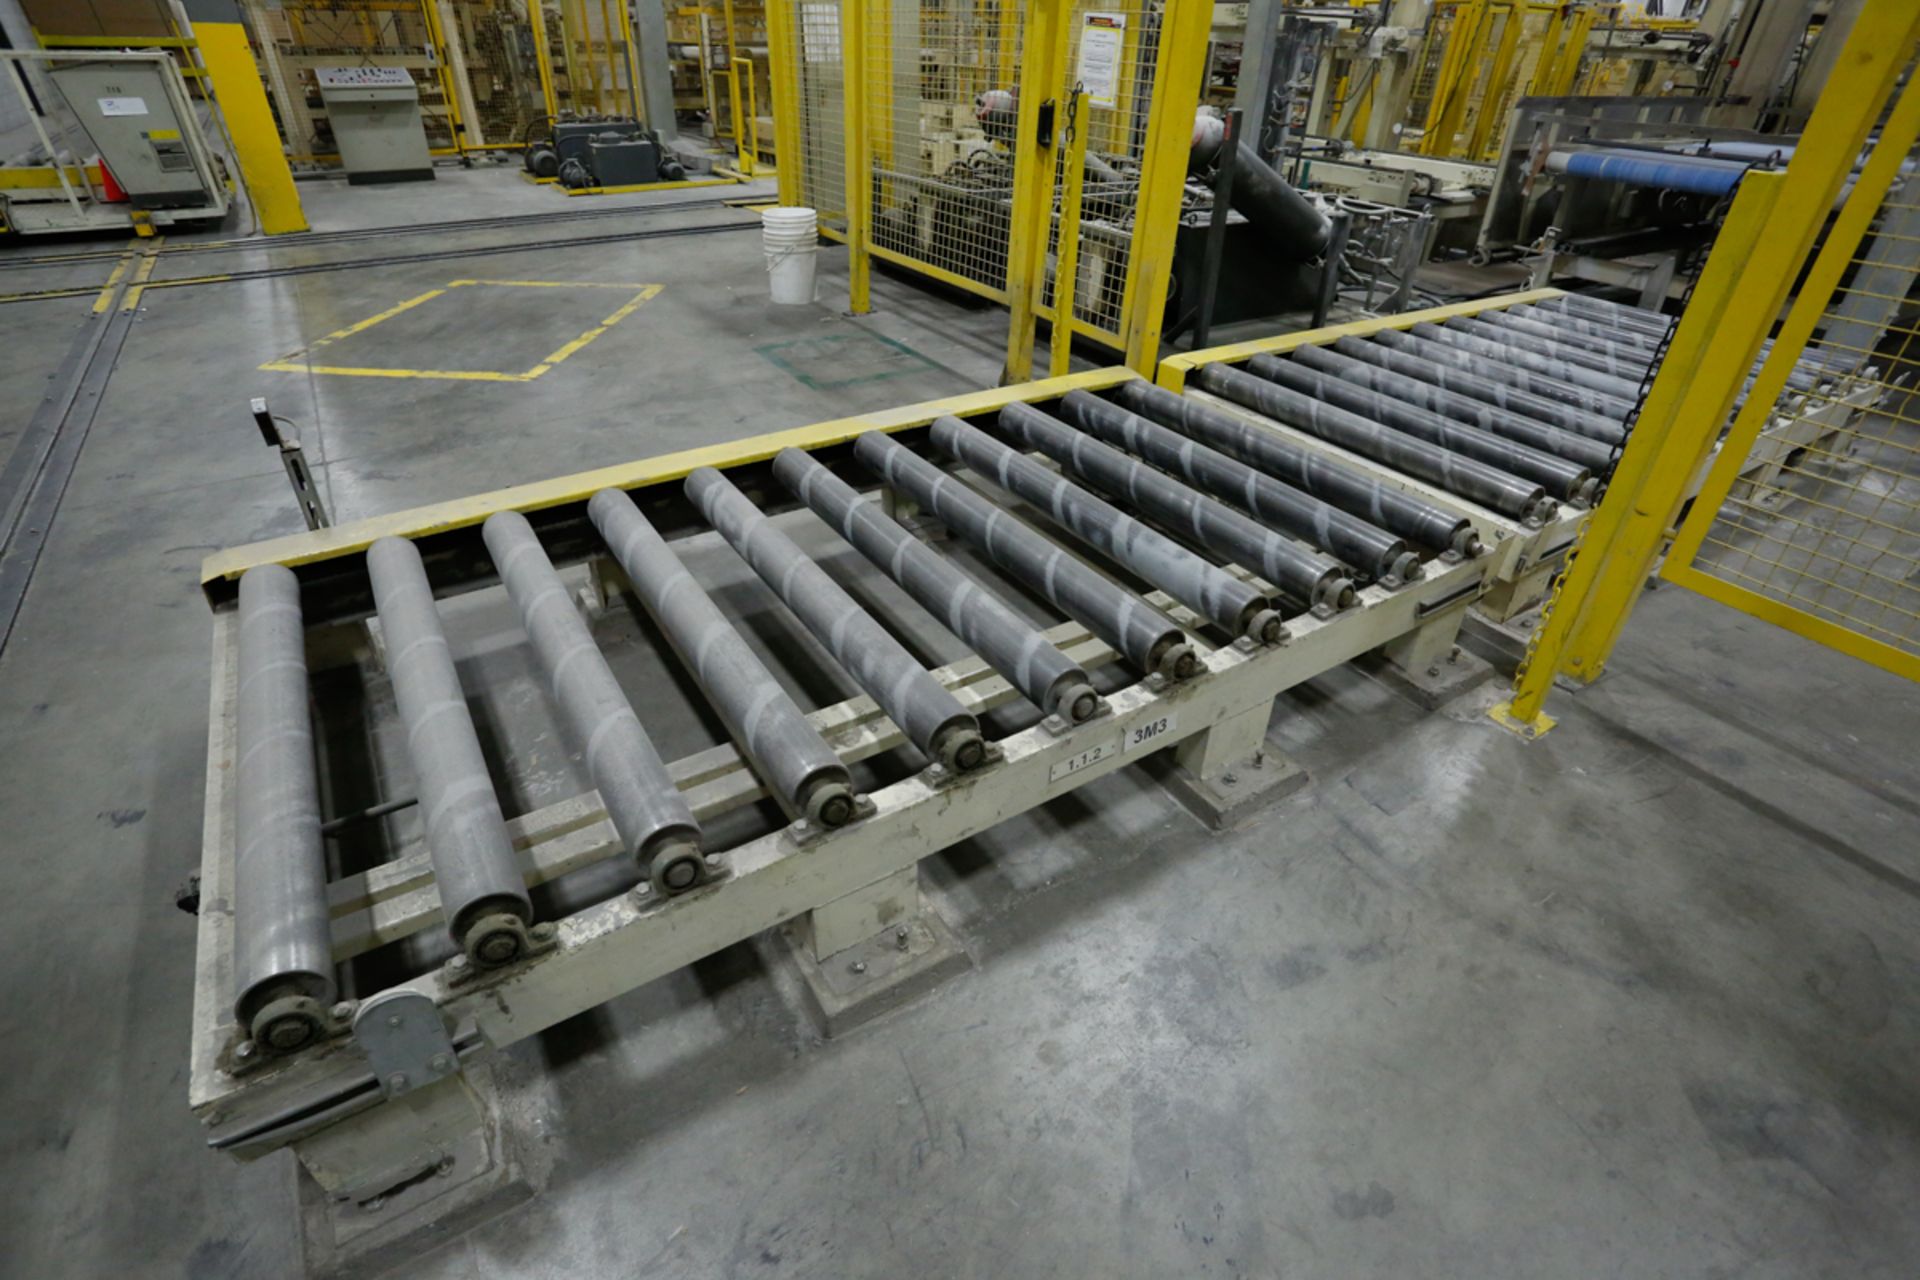 4' X 8' MOTORIZED ROLLER CONVEYORS (COMPRISING OF ITEM #1.1.0, 1.1.1, 1.2.0, 1.1.2, 1.1.3) - Image 4 of 5